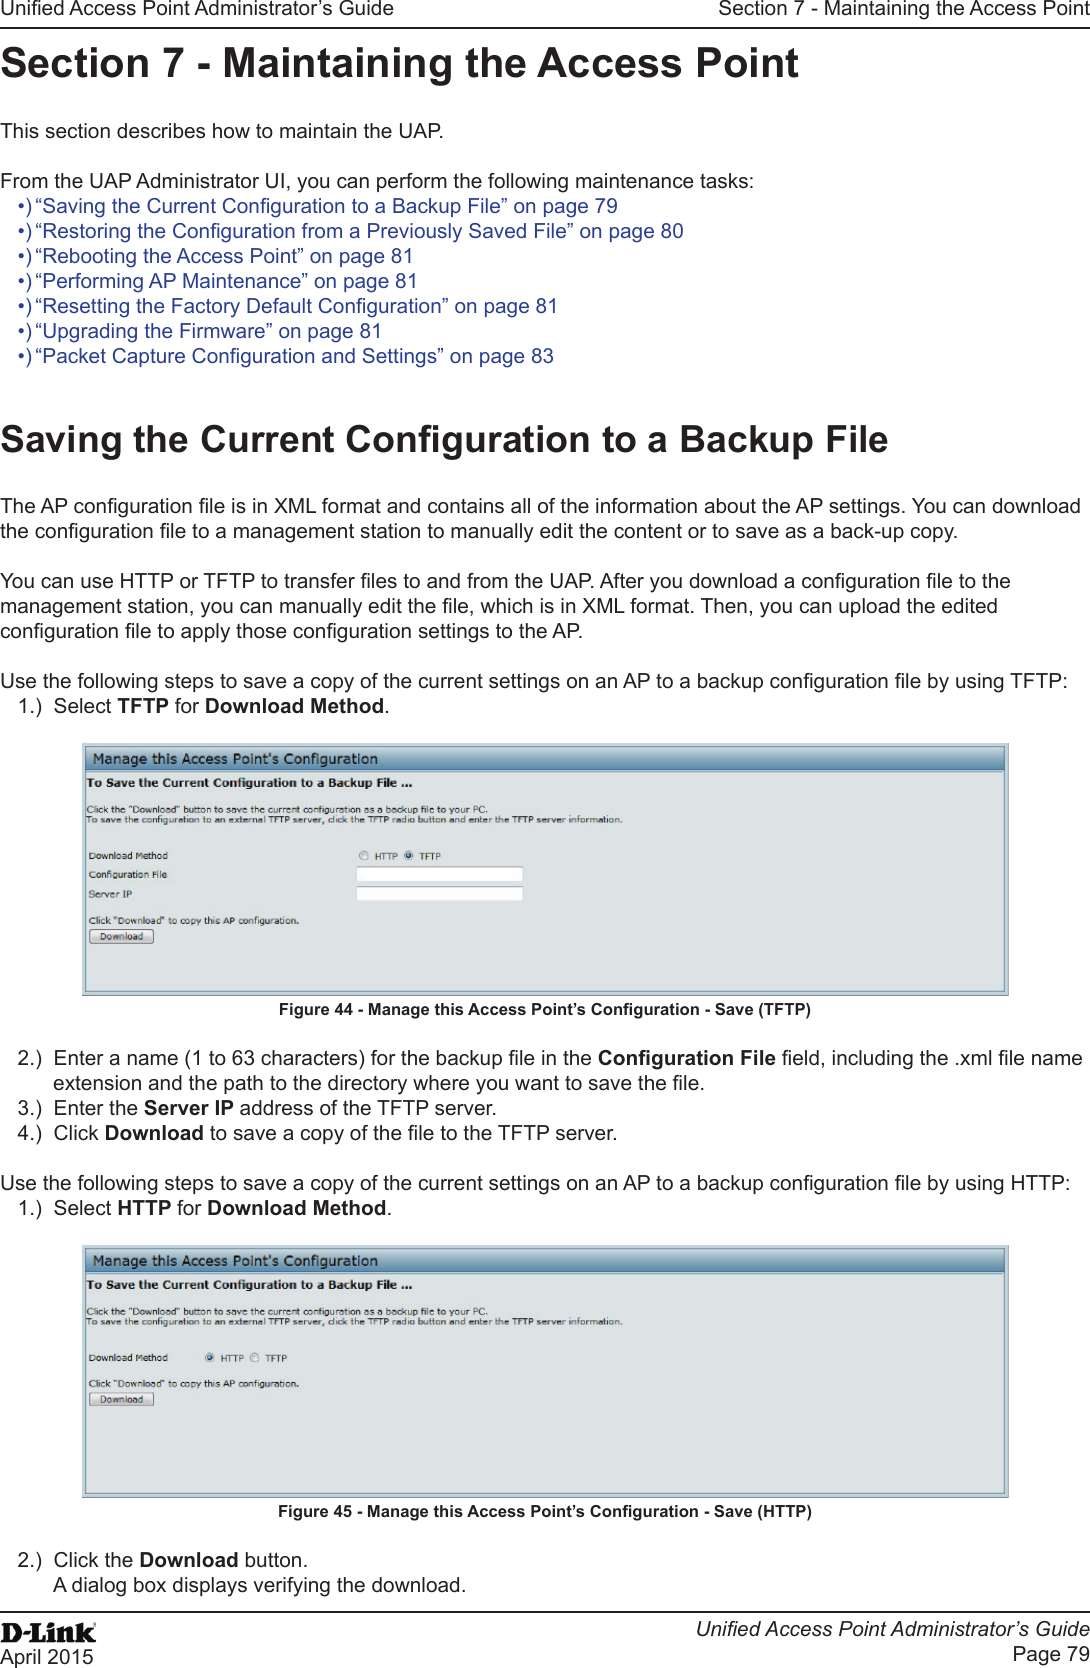 Unied Access Point Administrator’s GuideUnied Access Point Administrator’s GuidePage 79April 2015Section 7 - Maintaining the Access PointSection 7 - Maintaining the Access PointThis section describes how to maintain the UAP.From the UAP Administrator UI, you can perform the following maintenance tasks:•) “Saving the Current Conguration to a Backup File” on page 79•) “Restoring the Conguration from a Previously Saved File” on page 80•) “Rebooting the Access Point” on page 81•) “Performing AP Maintenance” on page 81•) “Resetting the Factory Default Conguration” on page 81•) “Upgrading the Firmware” on page 81•) “Packet Capture Conguration and Settings” on page 83Saving the Current Conguration to a Backup FileThe AP conguration le is in XML format and contains all of the information about the AP settings. You can download the conguration le to a management station to manually edit the content or to save as a back-up copy. You can use HTTP or TFTP to transfer les to and from the UAP. After you download a conguration le to the management station, you can manually edit the le, which is in XML format. Then, you can upload the edited conguration le to apply those conguration settings to the AP.Use the following steps to save a copy of the current settings on an AP to a backup conguration le by using TFTP:1.)  Select TFTP for Download Method.Figure 44 - Manage this Access Point’s Conguration - Save (TFTP)2.)  Enter a name (1 to 63 characters) for the backup le in the Conguration File eld, including the .xml le name extension and the path to the directory where you want to save the le.3.)  Enter the Server IP address of the TFTP server.4.)  Click Download to save a copy of the le to the TFTP server.Use the following steps to save a copy of the current settings on an AP to a backup conguration le by using HTTP:1.)  Select HTTP for Download Method.Figure 45 - Manage this Access Point’s Conguration - Save (HTTP)2.)  Click the Download button.A dialog box displays verifying the download.